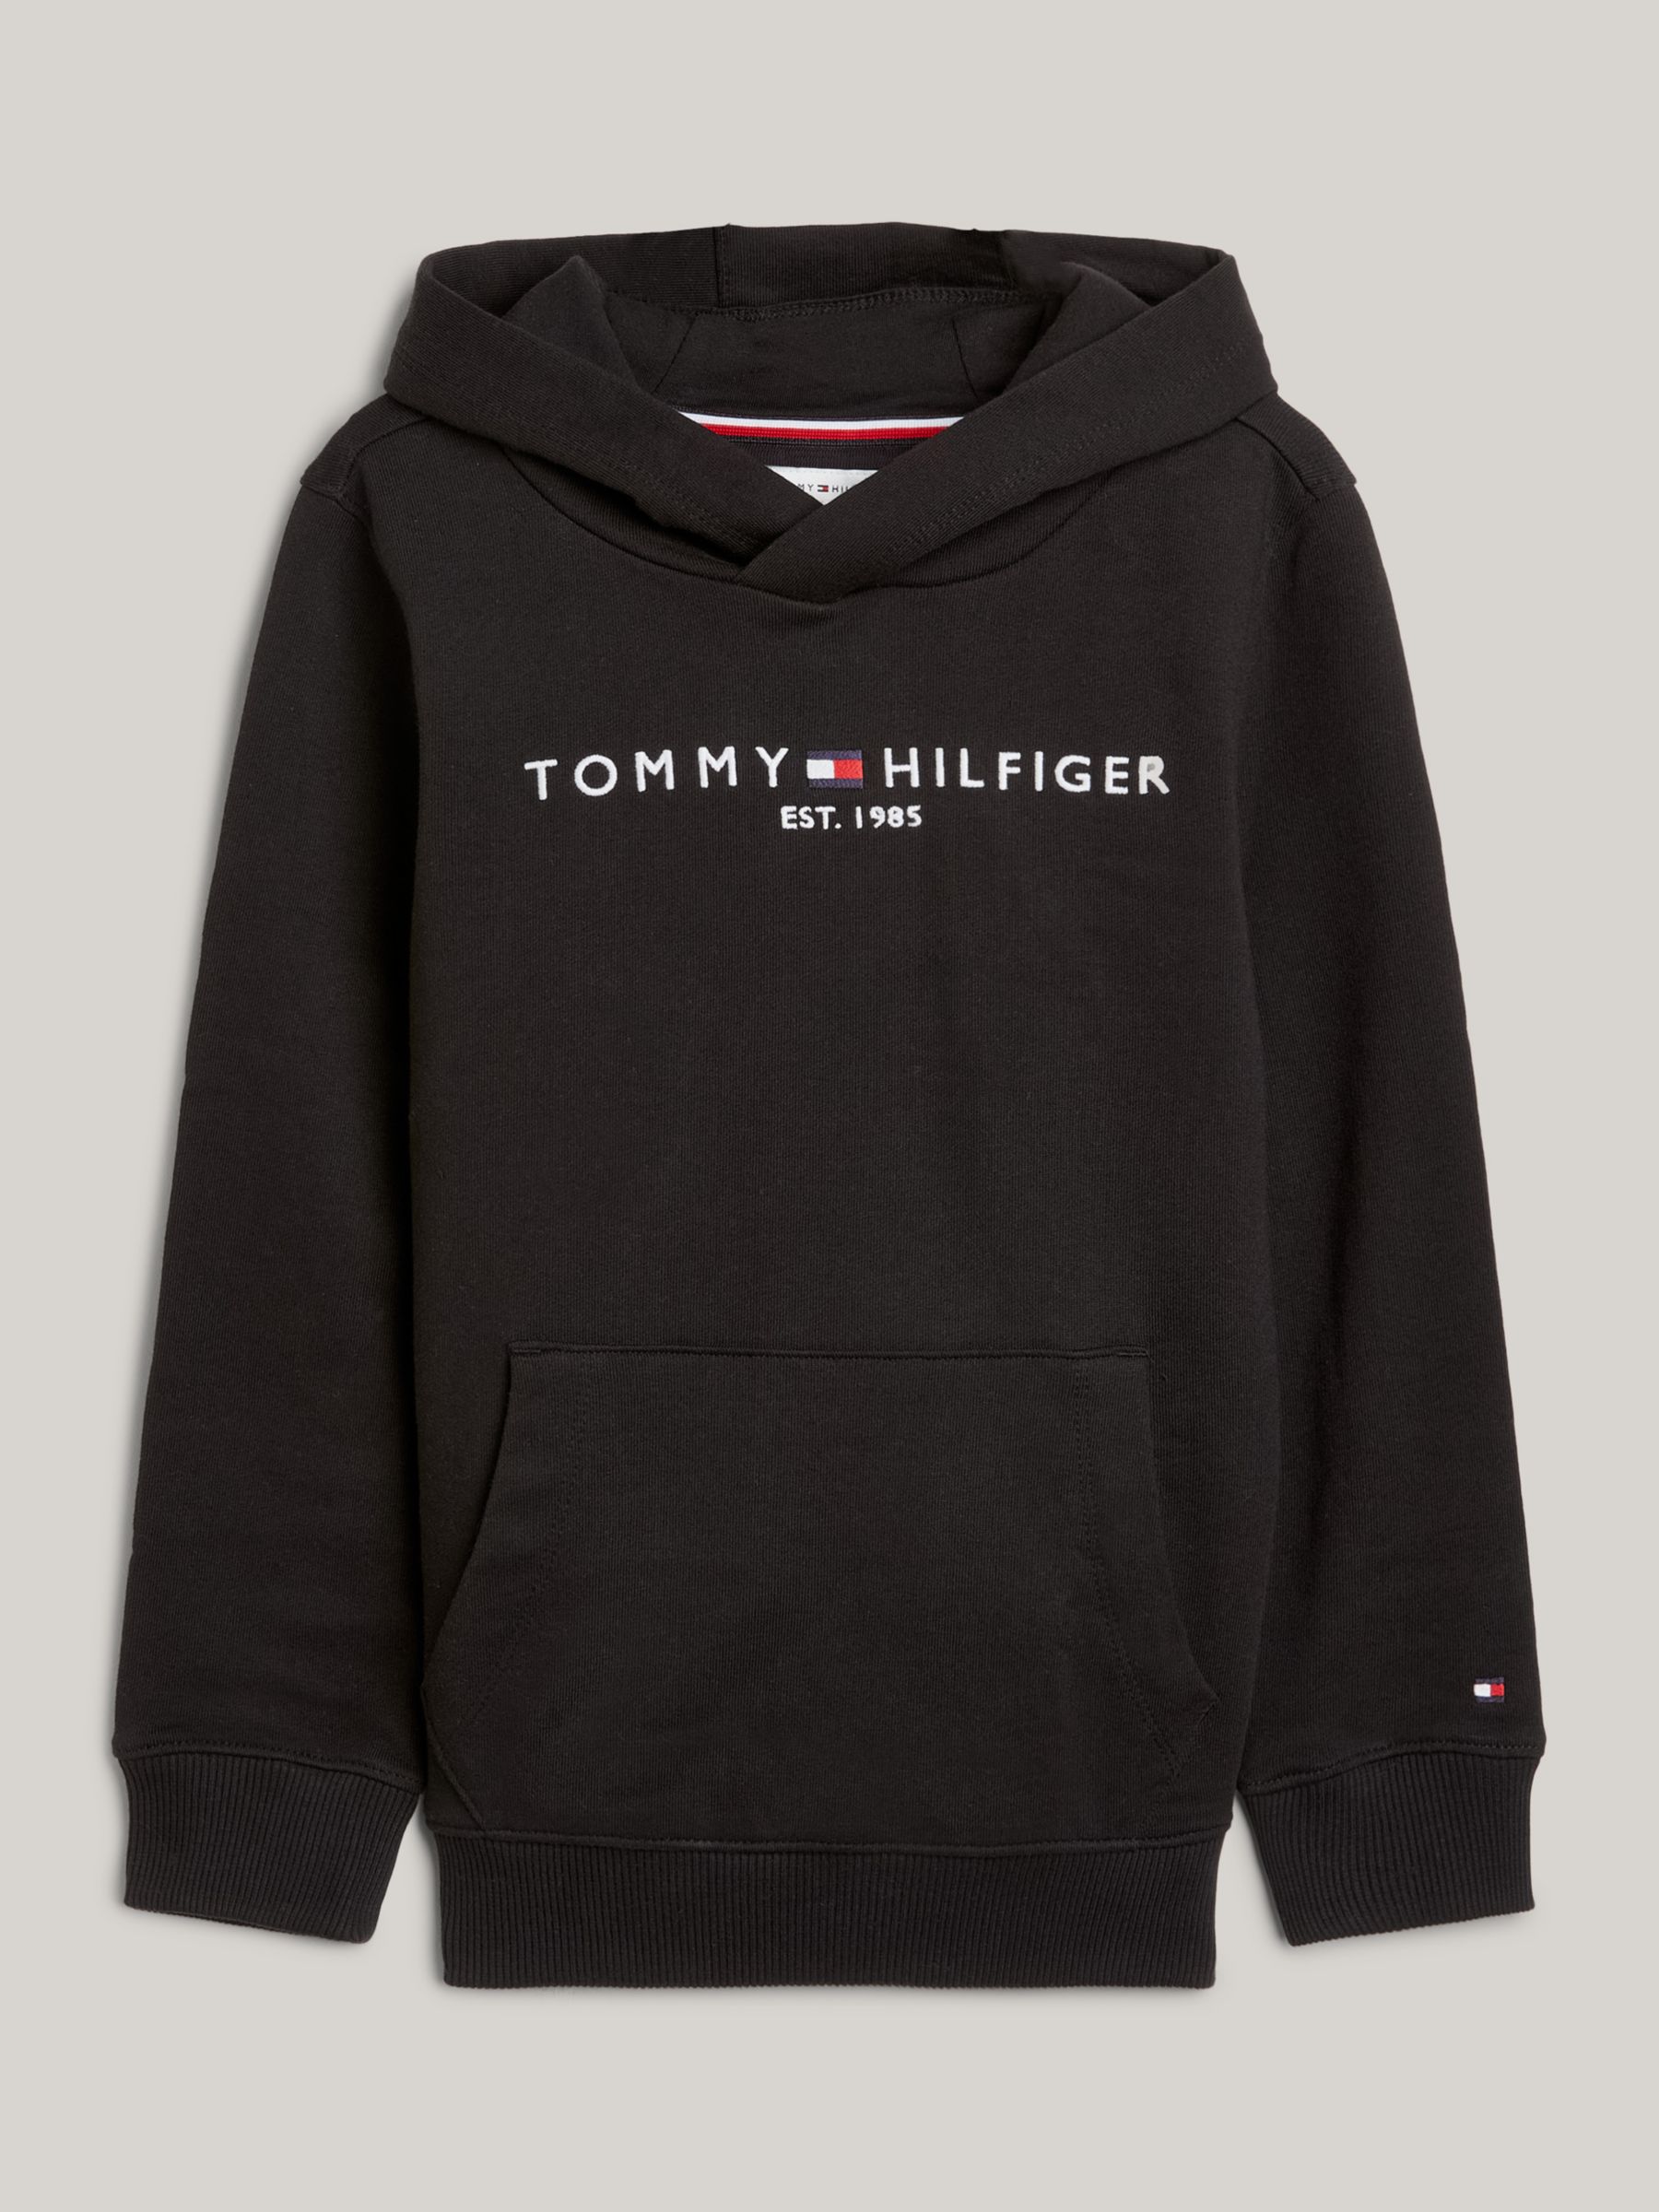 Essential: Tommy Hilfiger True to the Blue collection - DA MAN